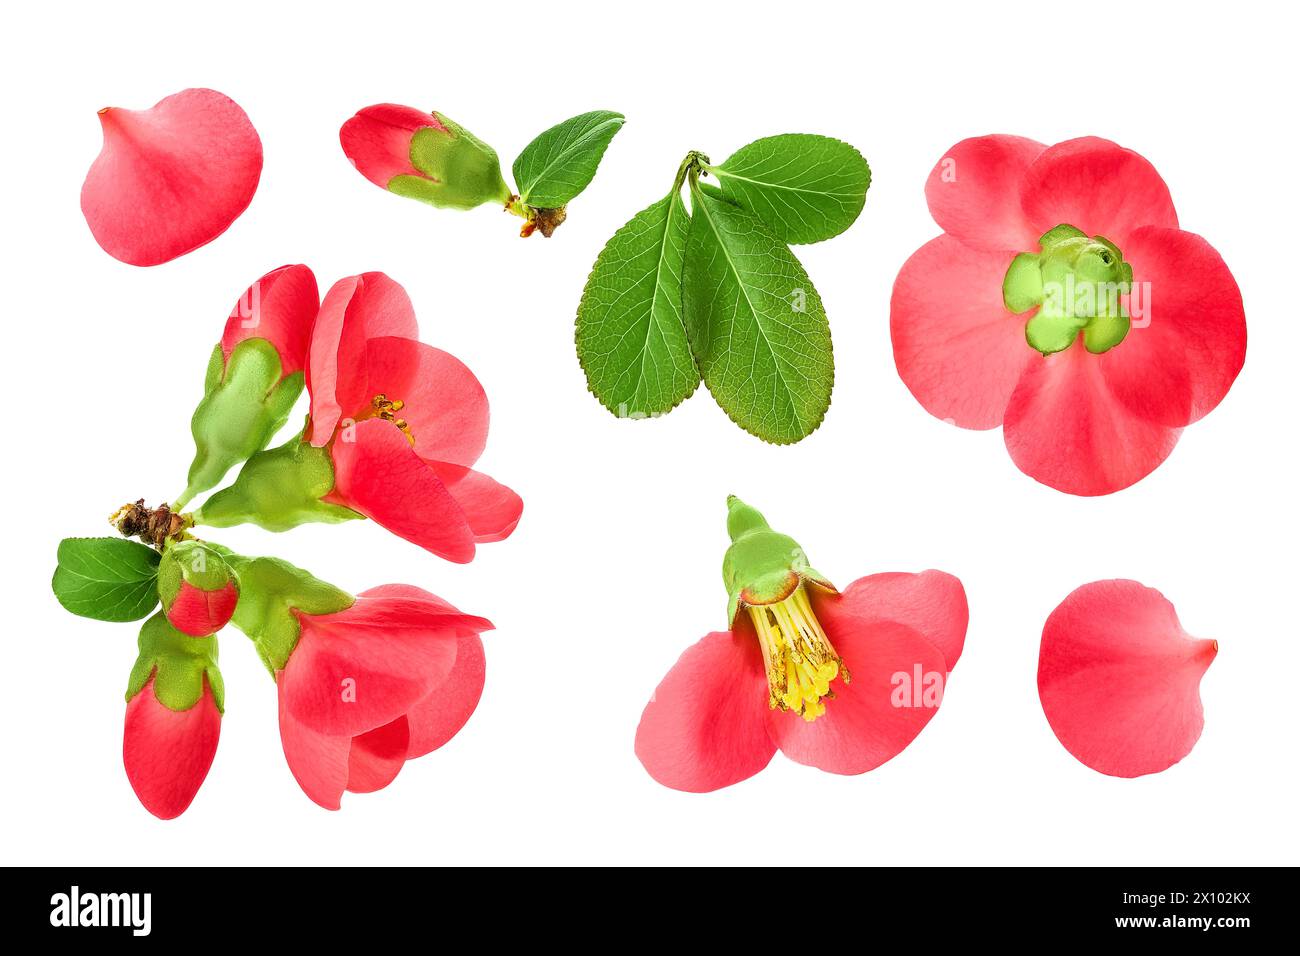 Chaenomeles speciosa or japanese quince flower isolated on white background Stock Photo